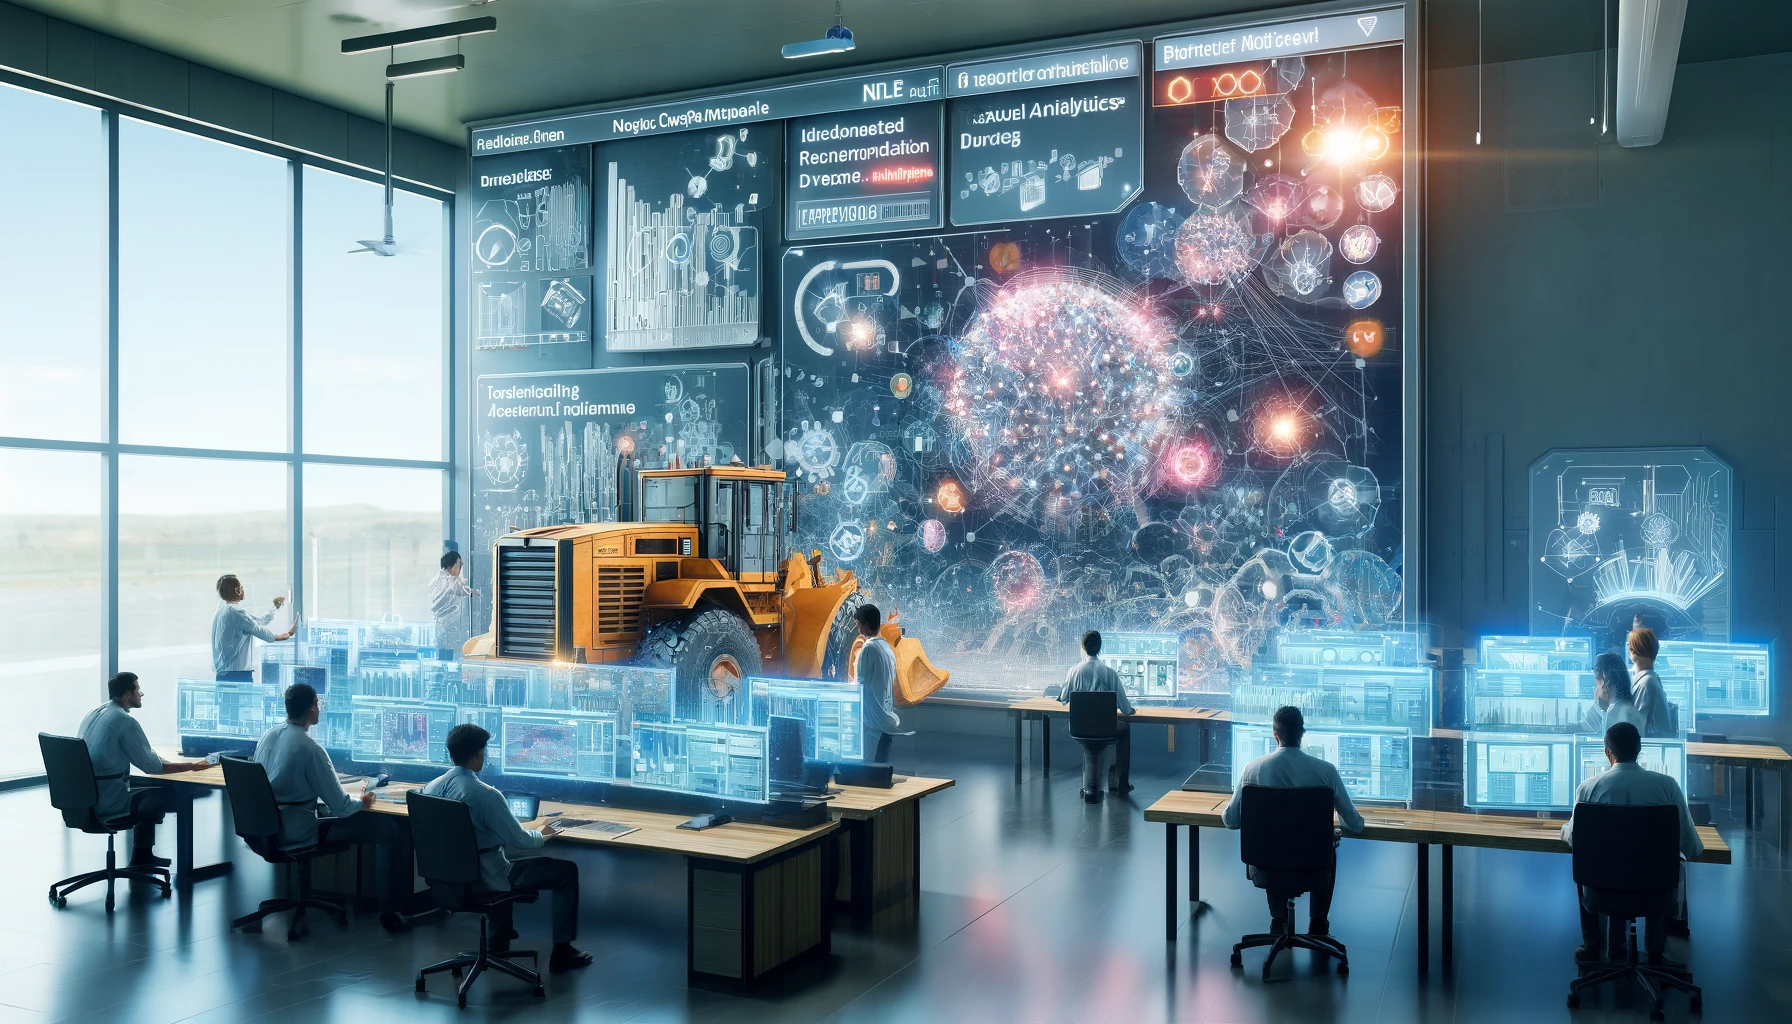 Here is the illustration for the article about the construction equipment manufacturer's use of Neo4j and NLP tools to transform isolated repair documents into a searchable knowledge base. The digital painting captures a high-tech command center focused on data analysis and trend identification.